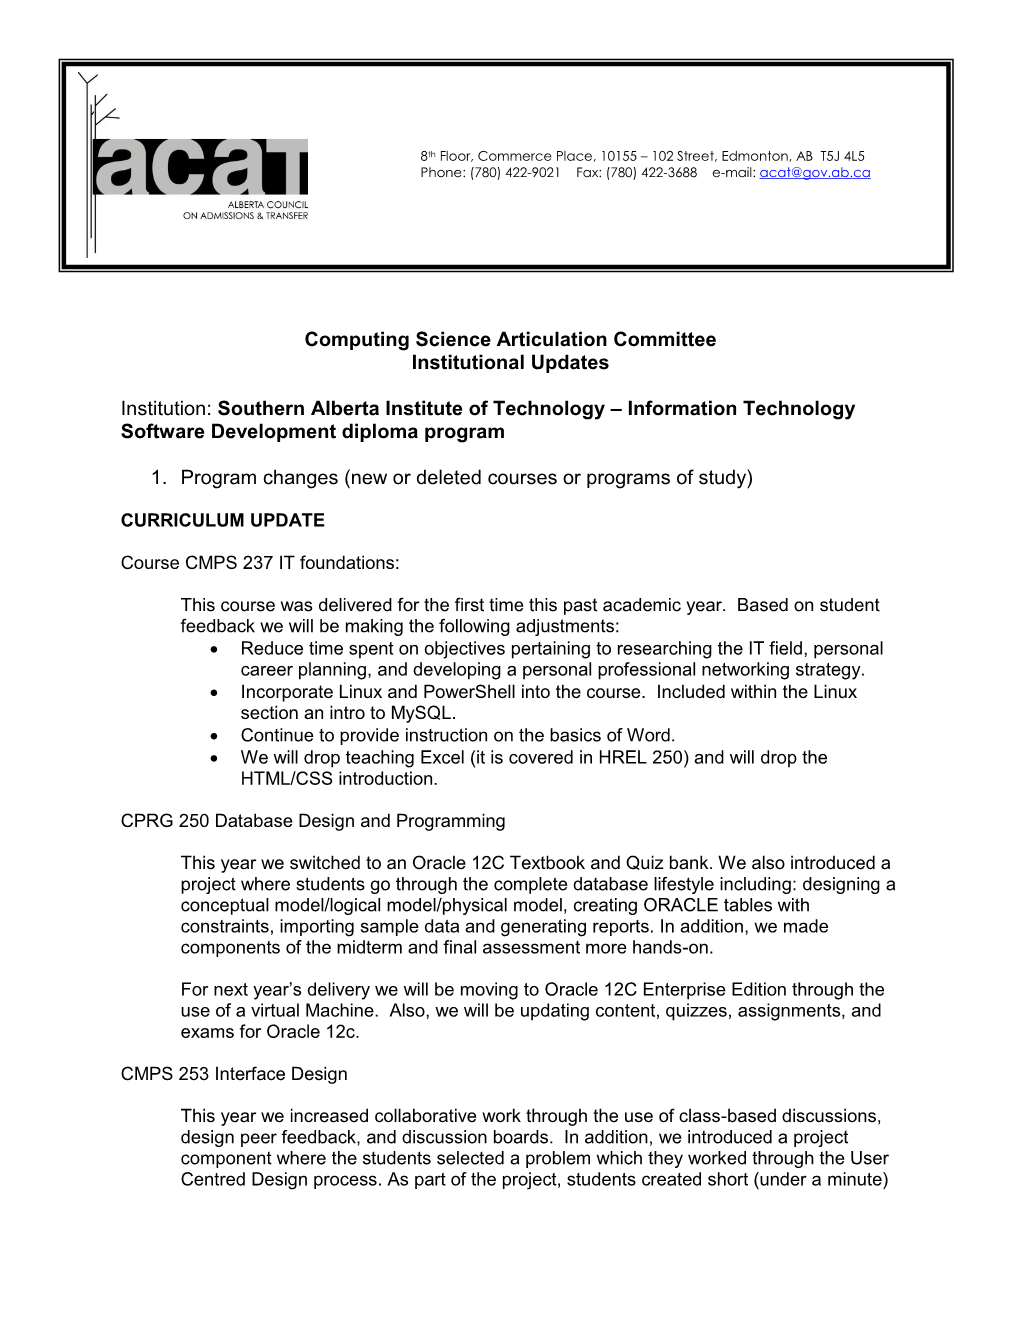 Computing Science Articulation Committee Institutional Updates Institution: Southern Alberta Institute of Technology – Informa